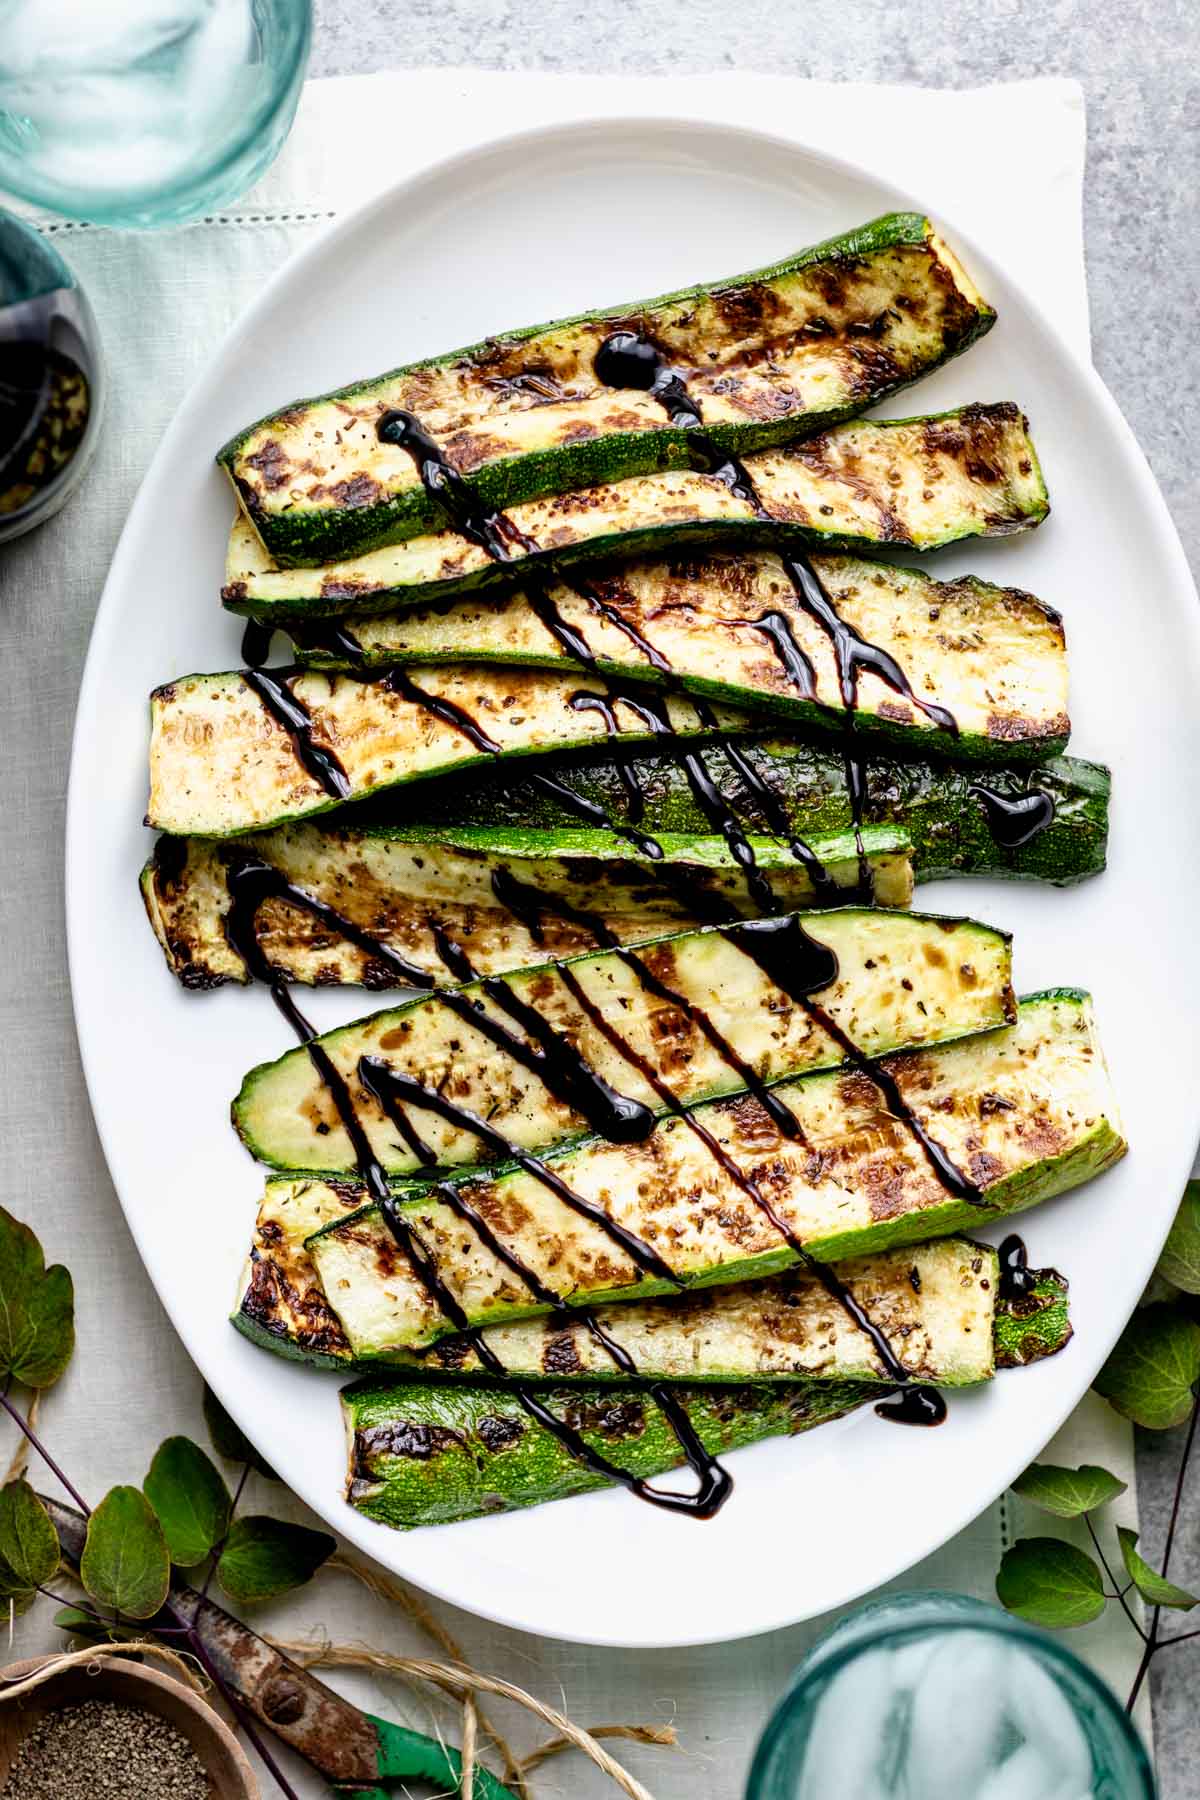 I. Introduction to grilling zucchini